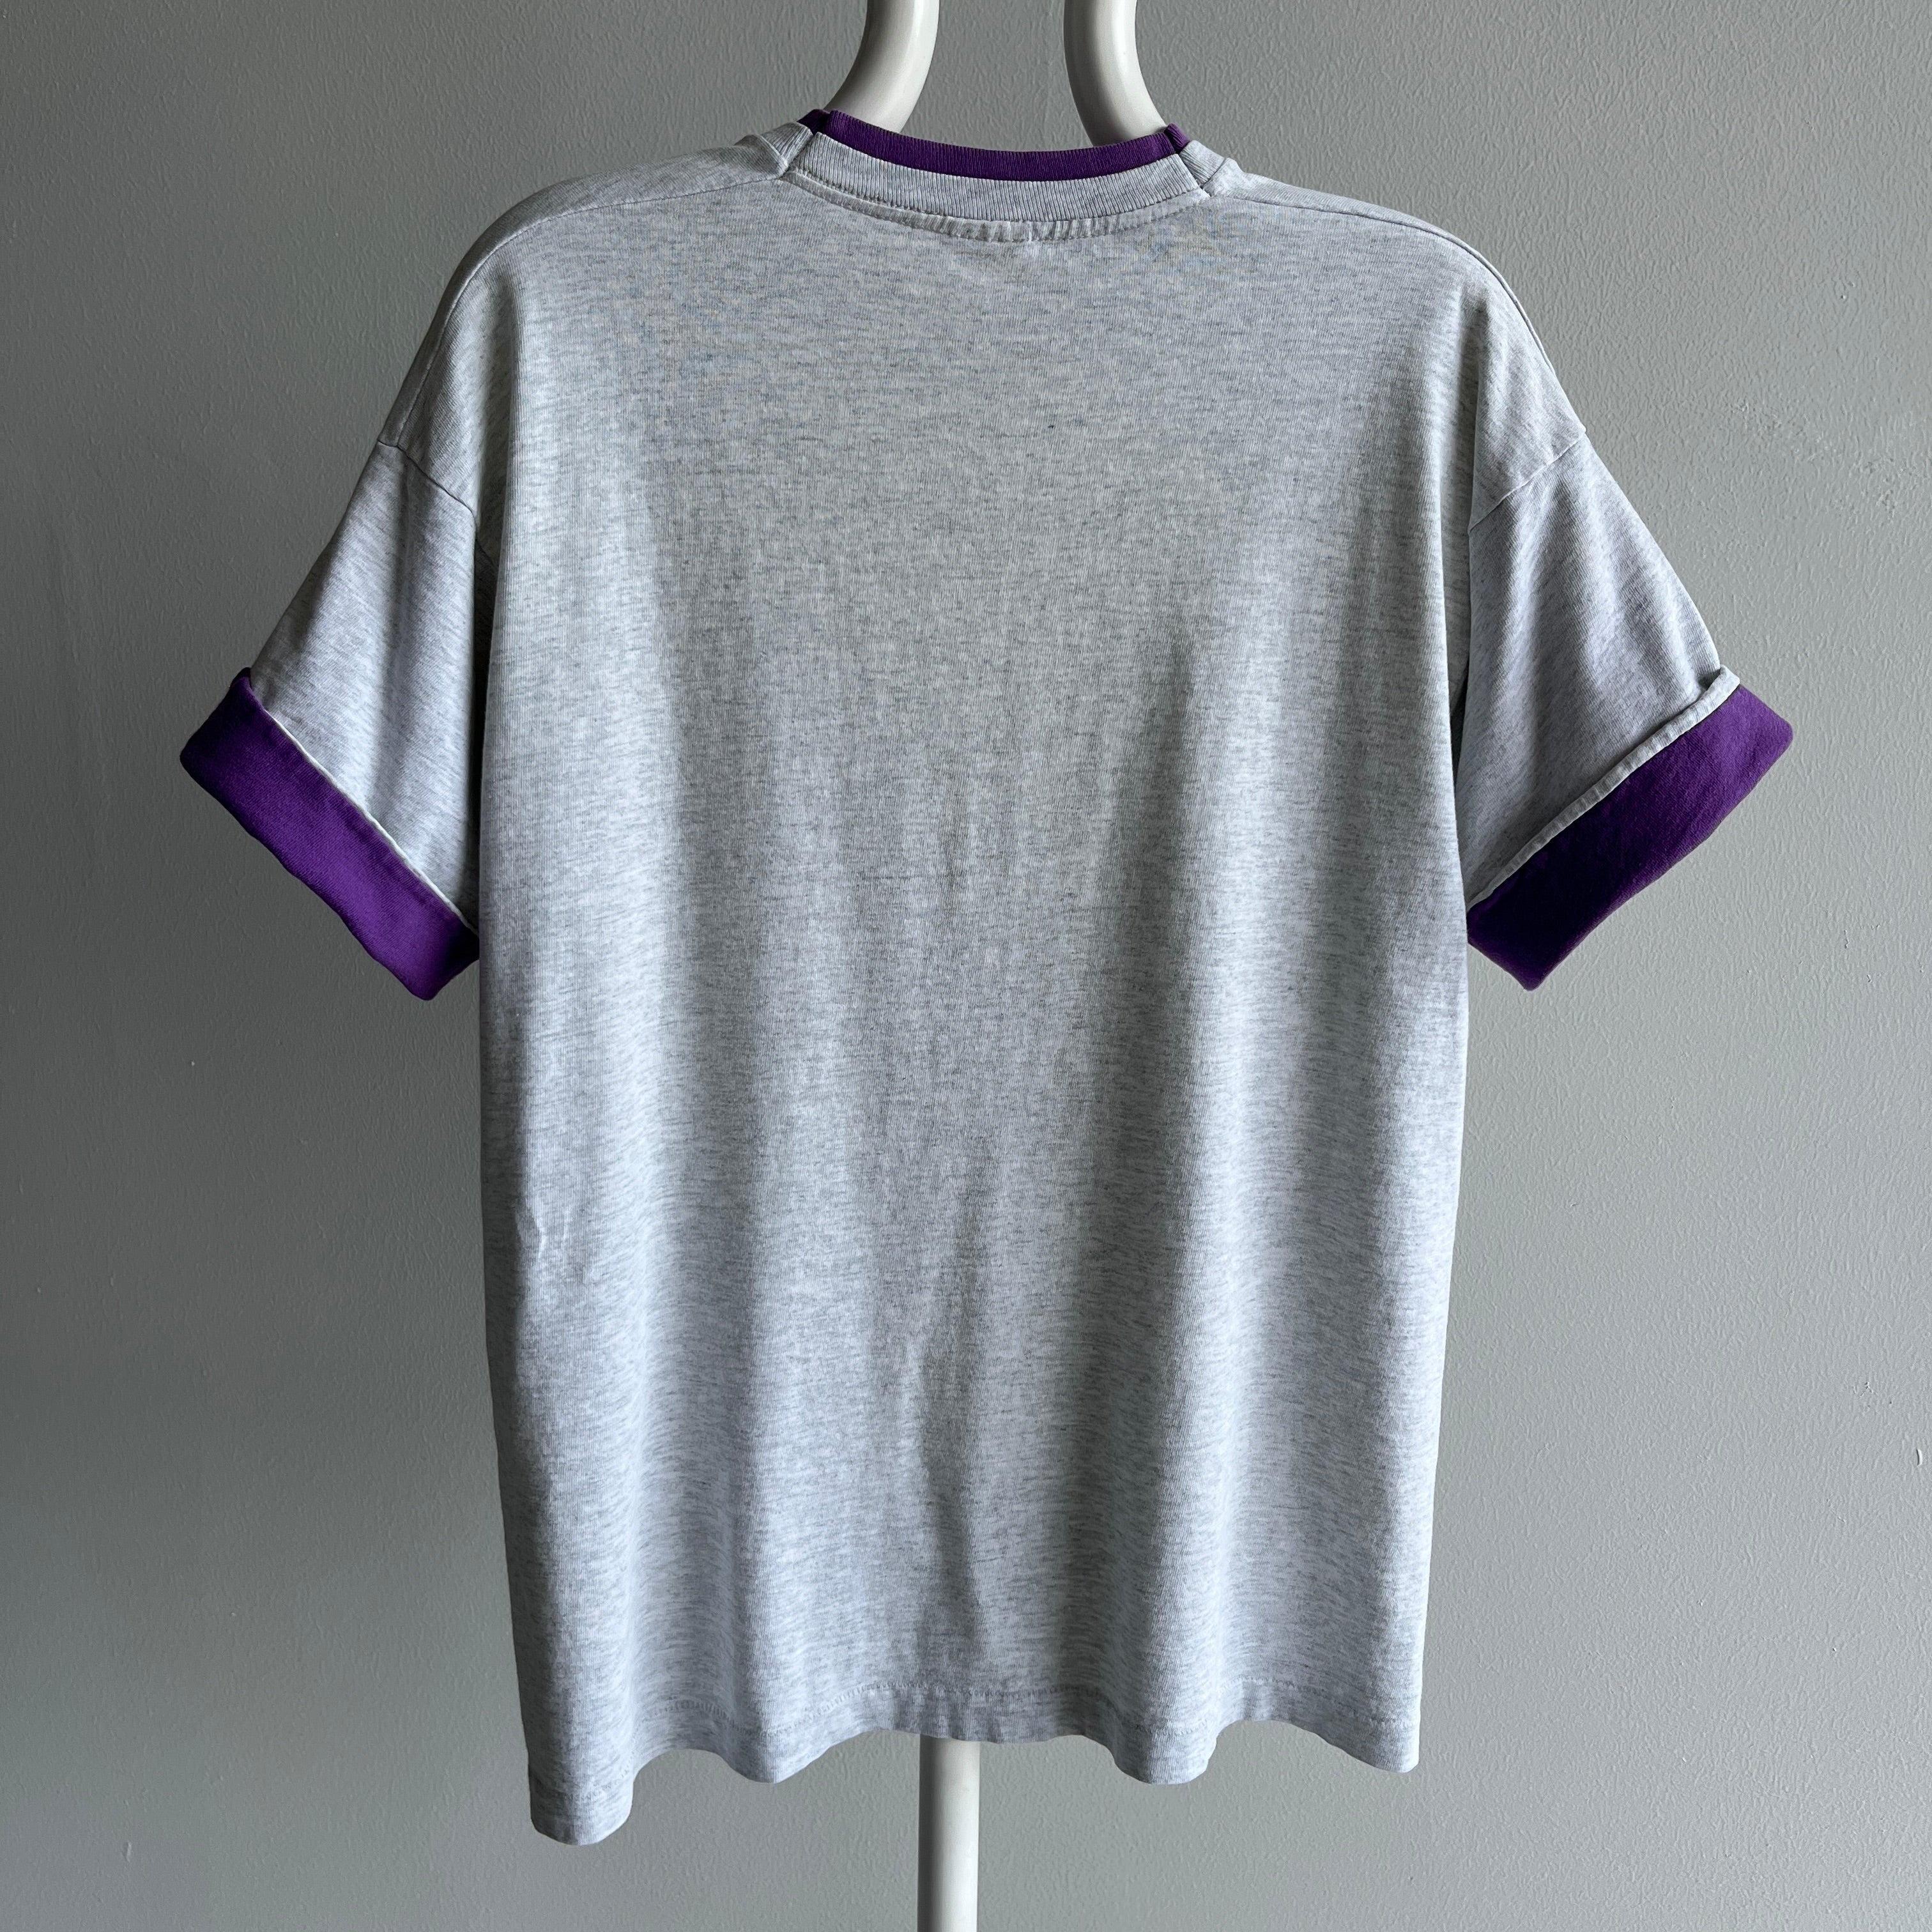 1980s Two Tone Gray and Purple FOTL with Staining